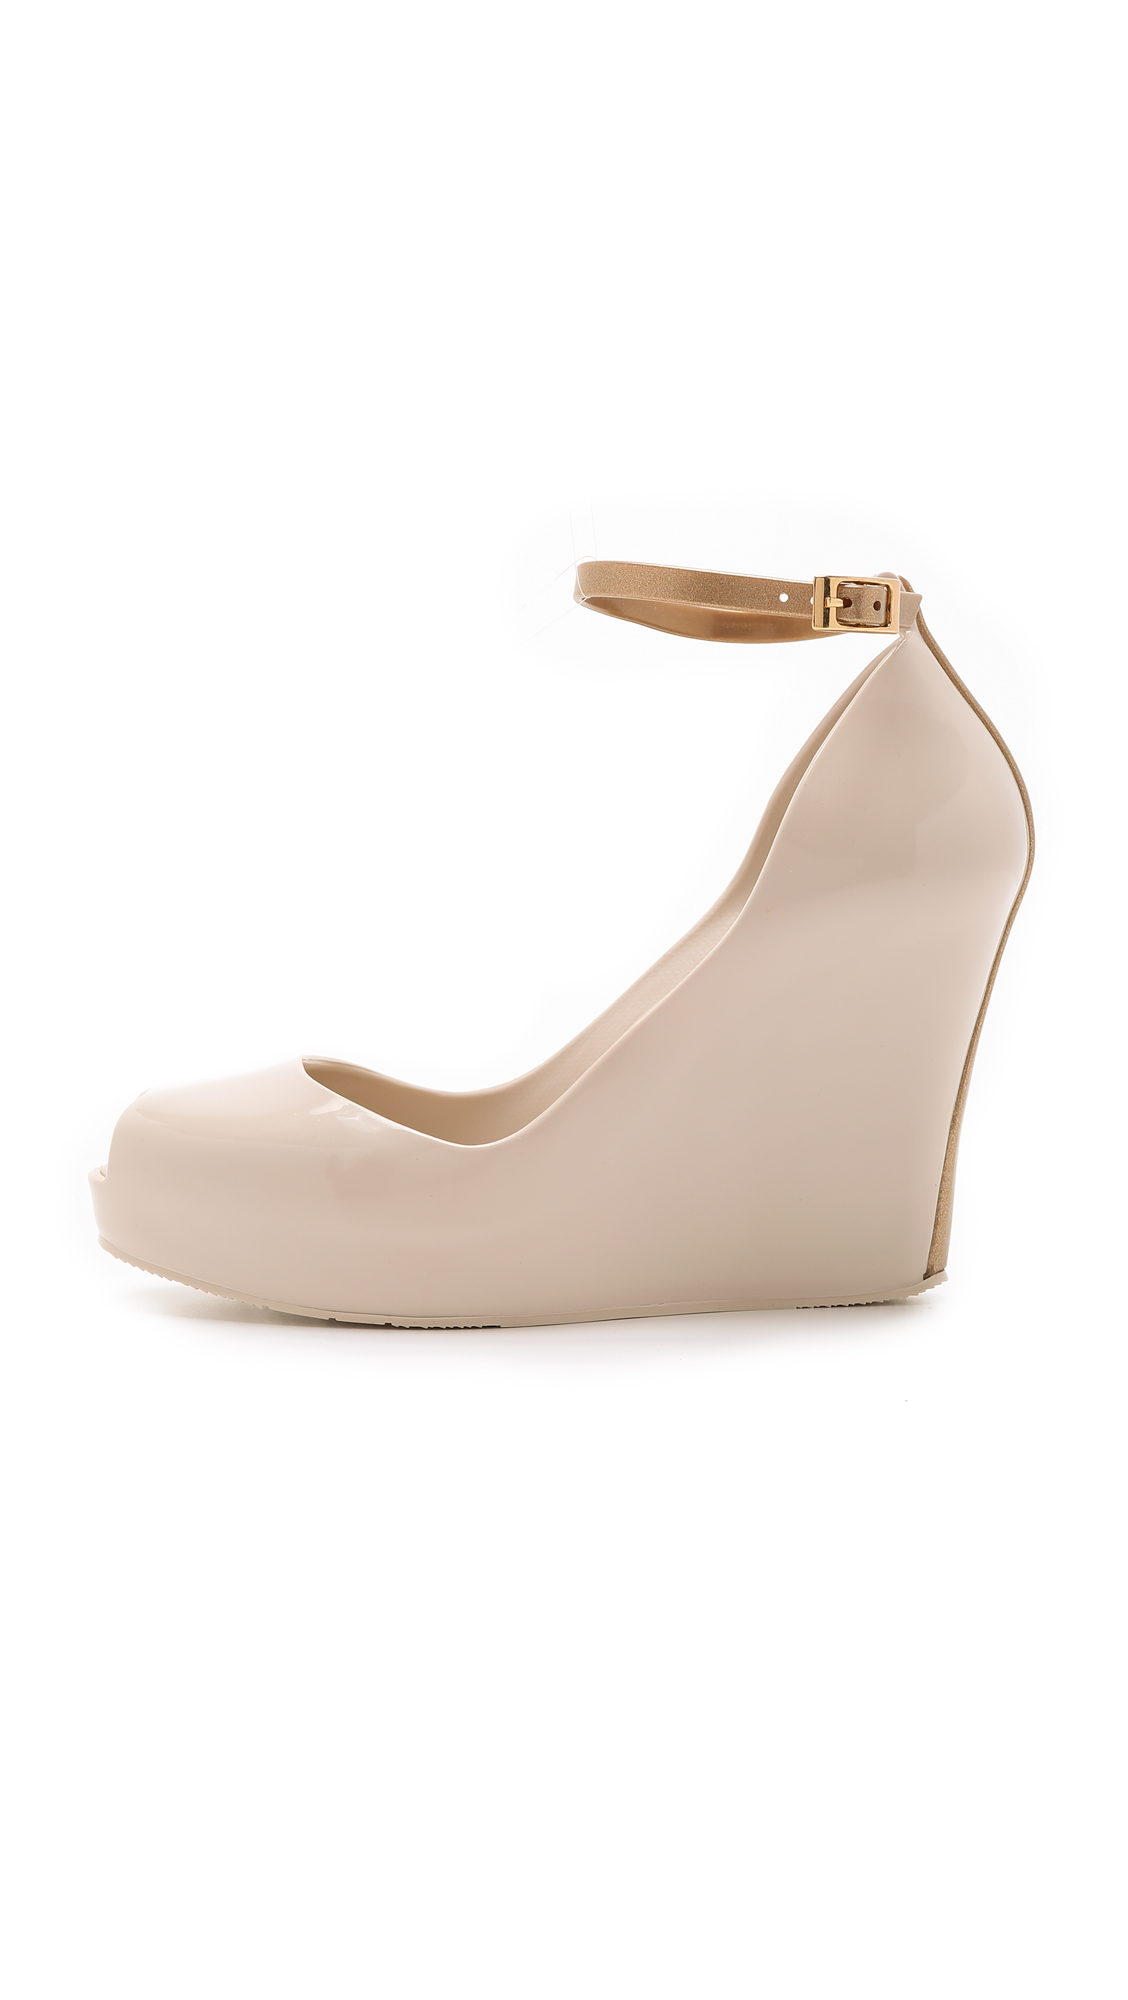 Melissa Patchuli Wedges - Beige/gold in Natural | Lyst